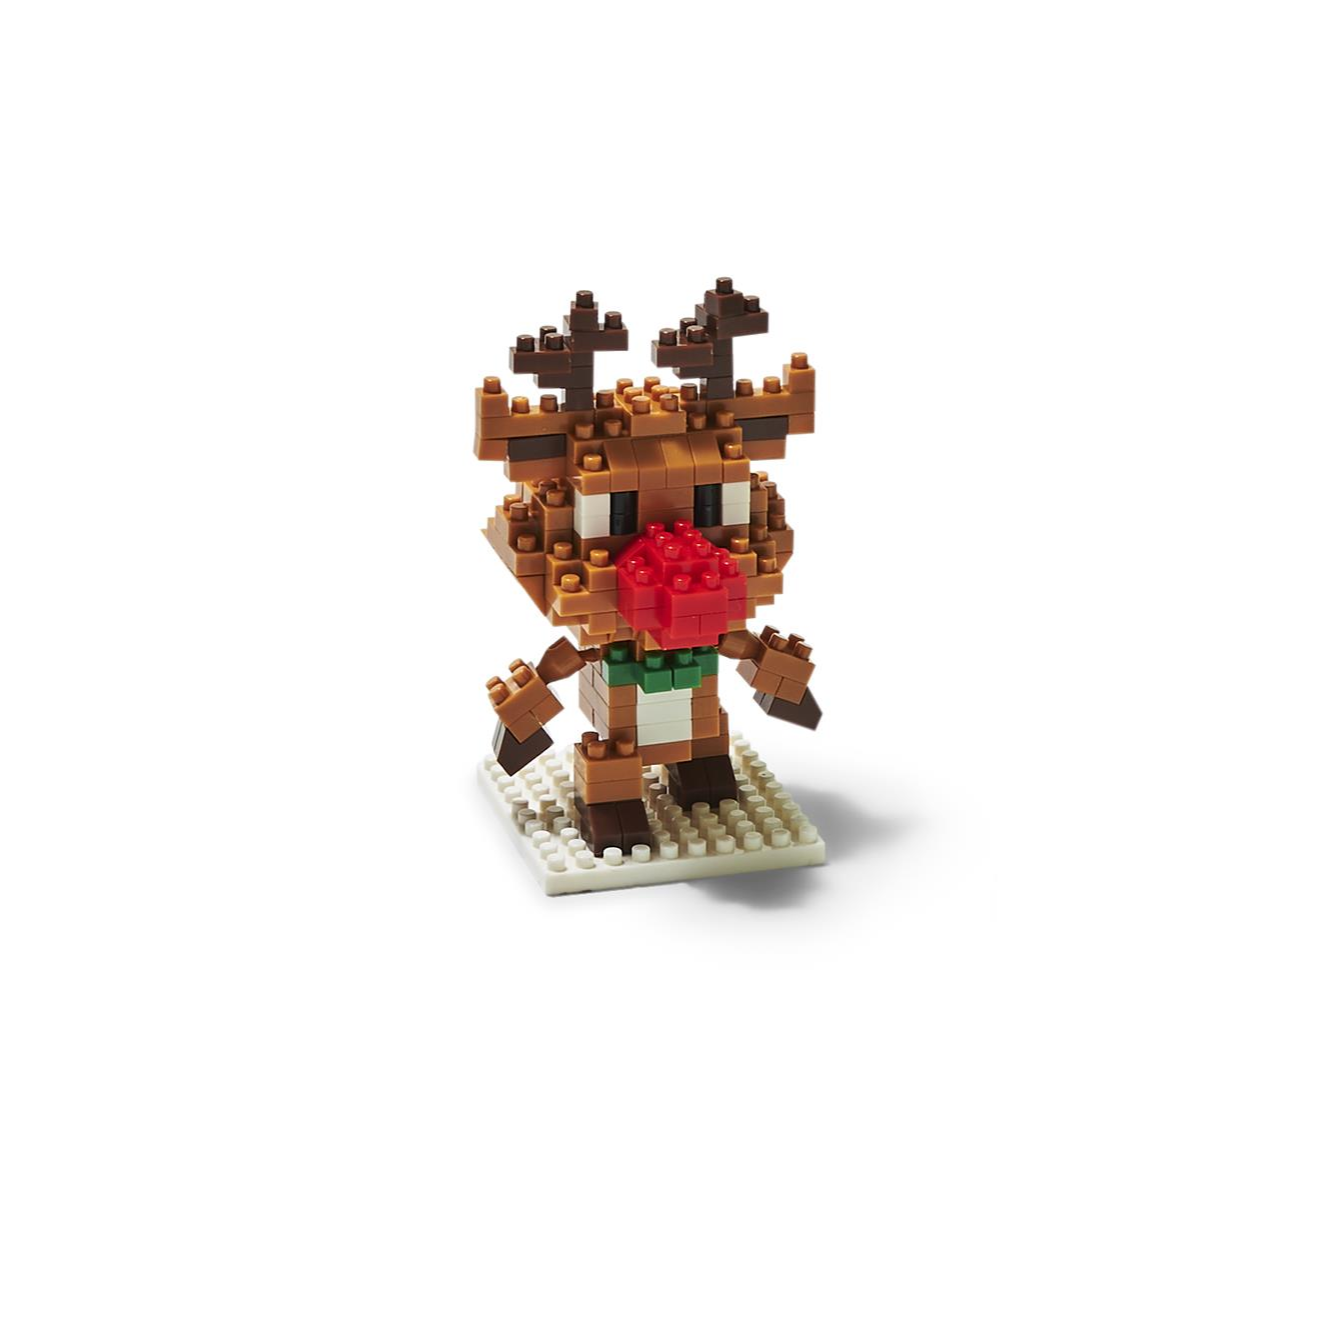 Rudolph the Red Nosed Reindeer Mini Building Block Set